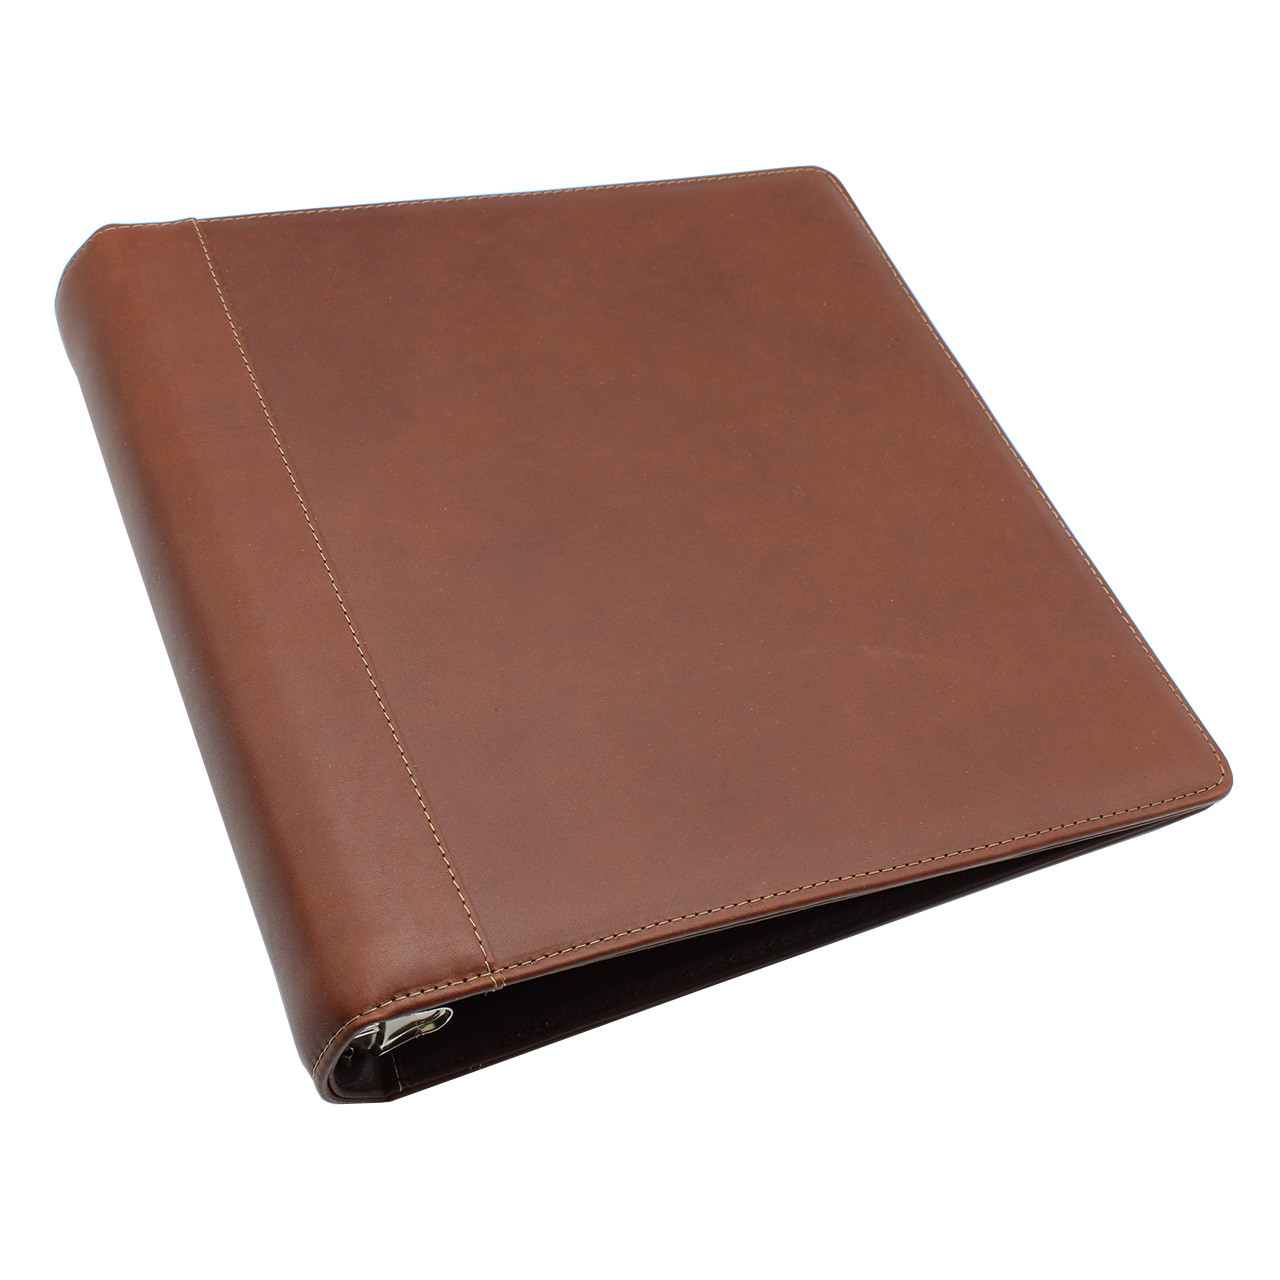 Leather 3 Ring Binder, A Ringed Binder of Real Full Grain